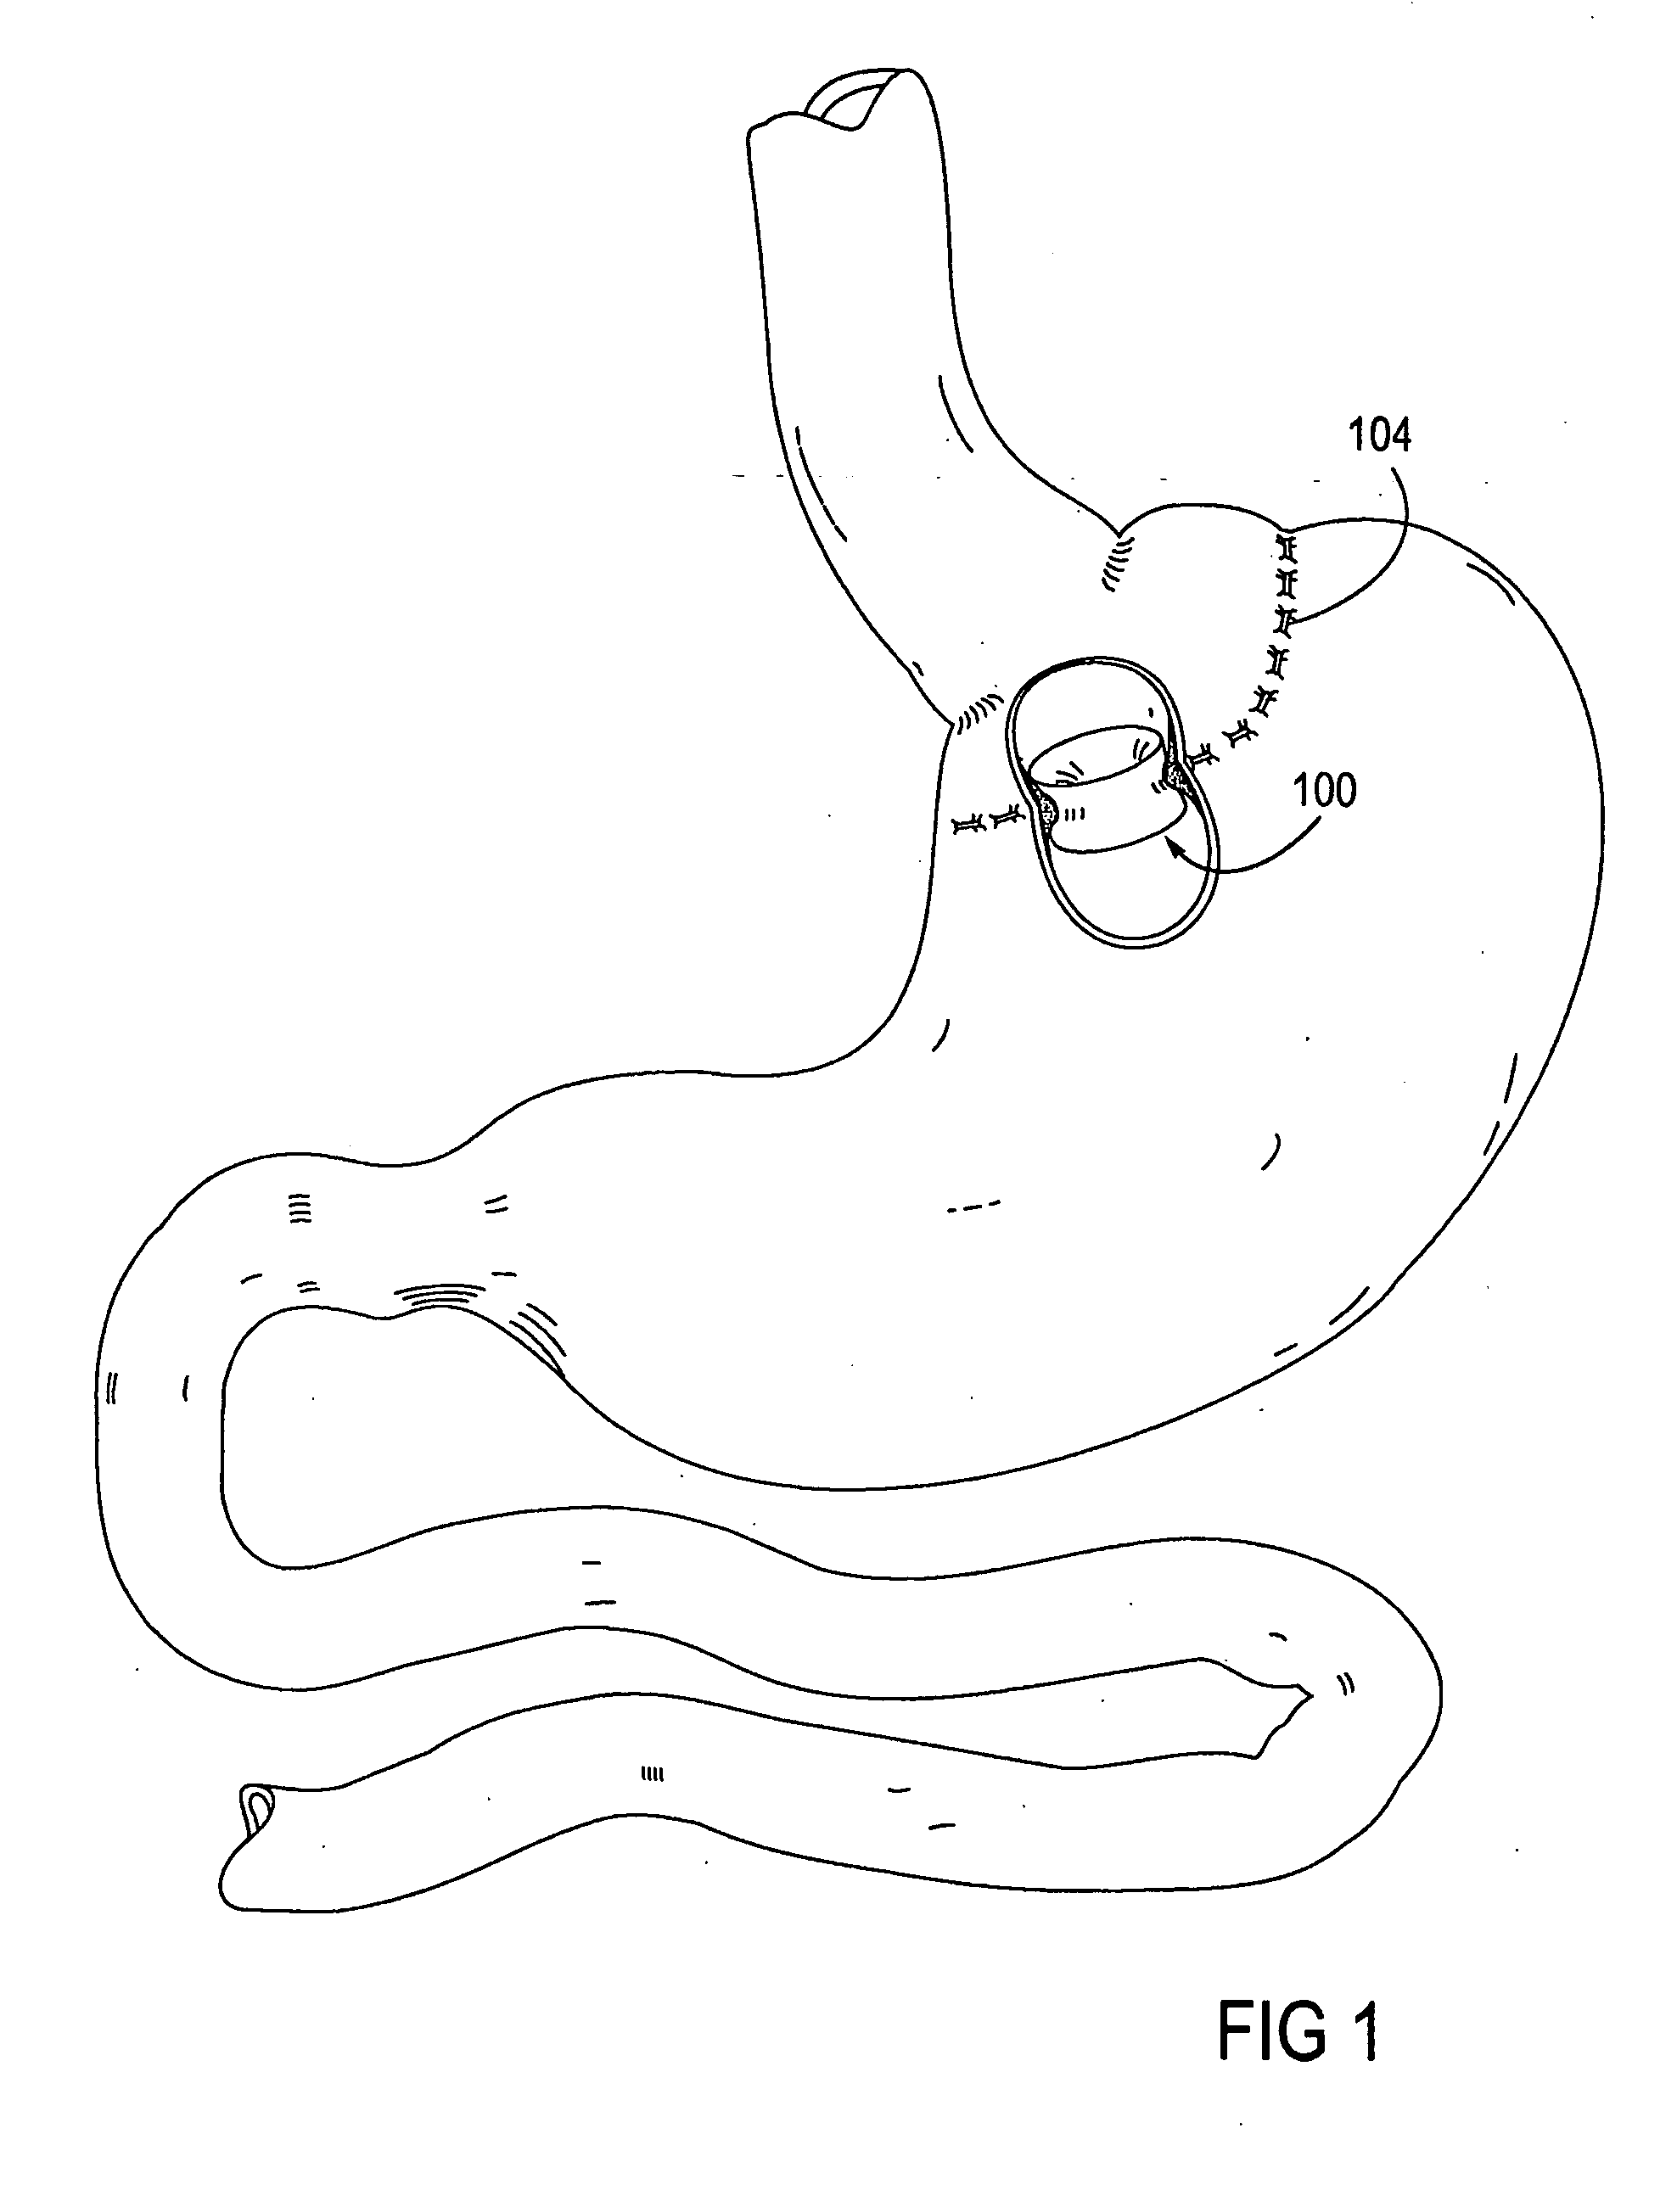 Gastrointestinal sleeve device and methods for treatment of morbid obesity